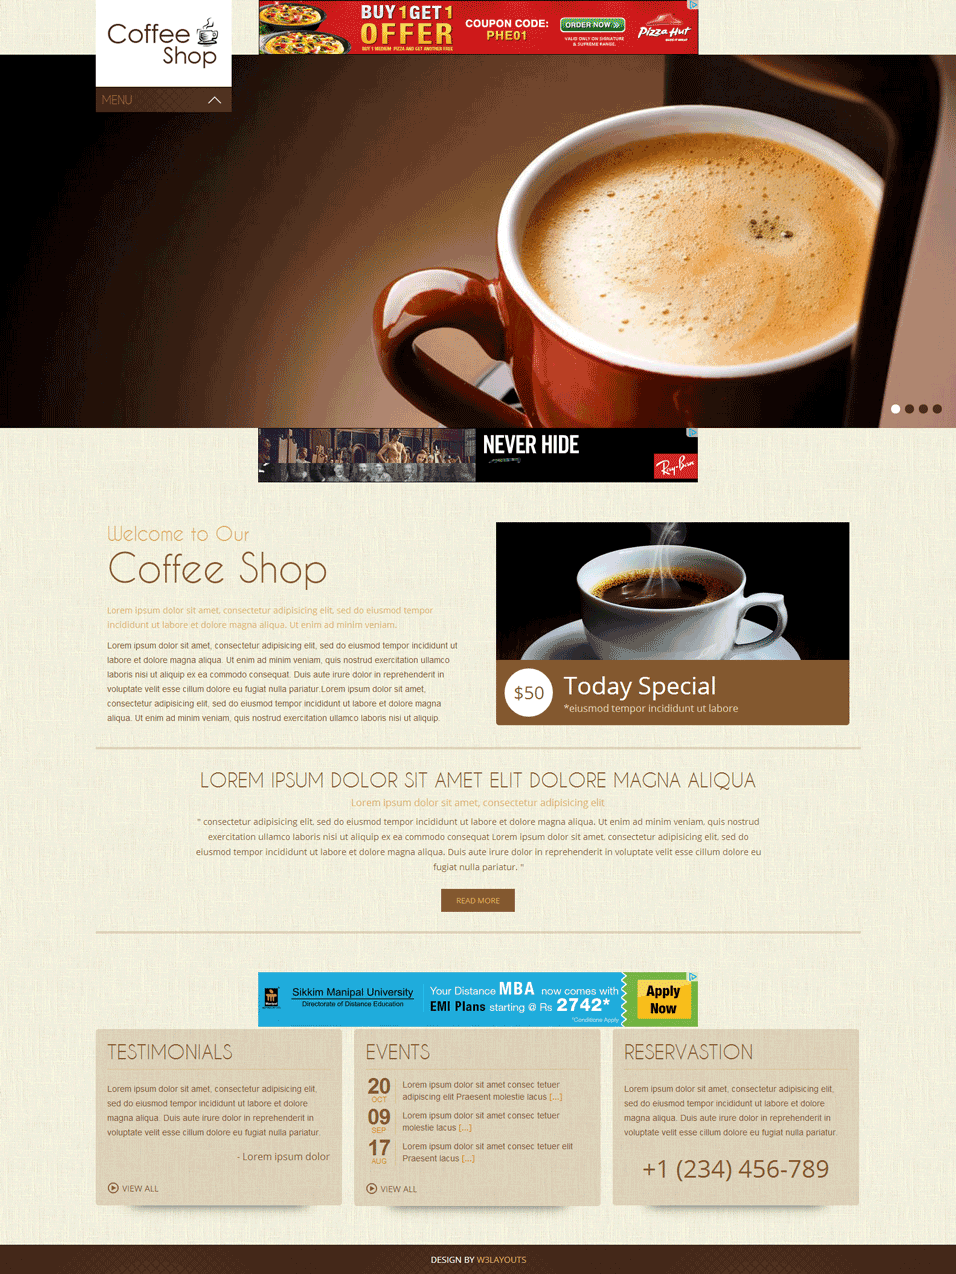 http://www.template.net/wp-content/uploads/2014/07/Coffee-Shop-Mobile-Website-Template.gif